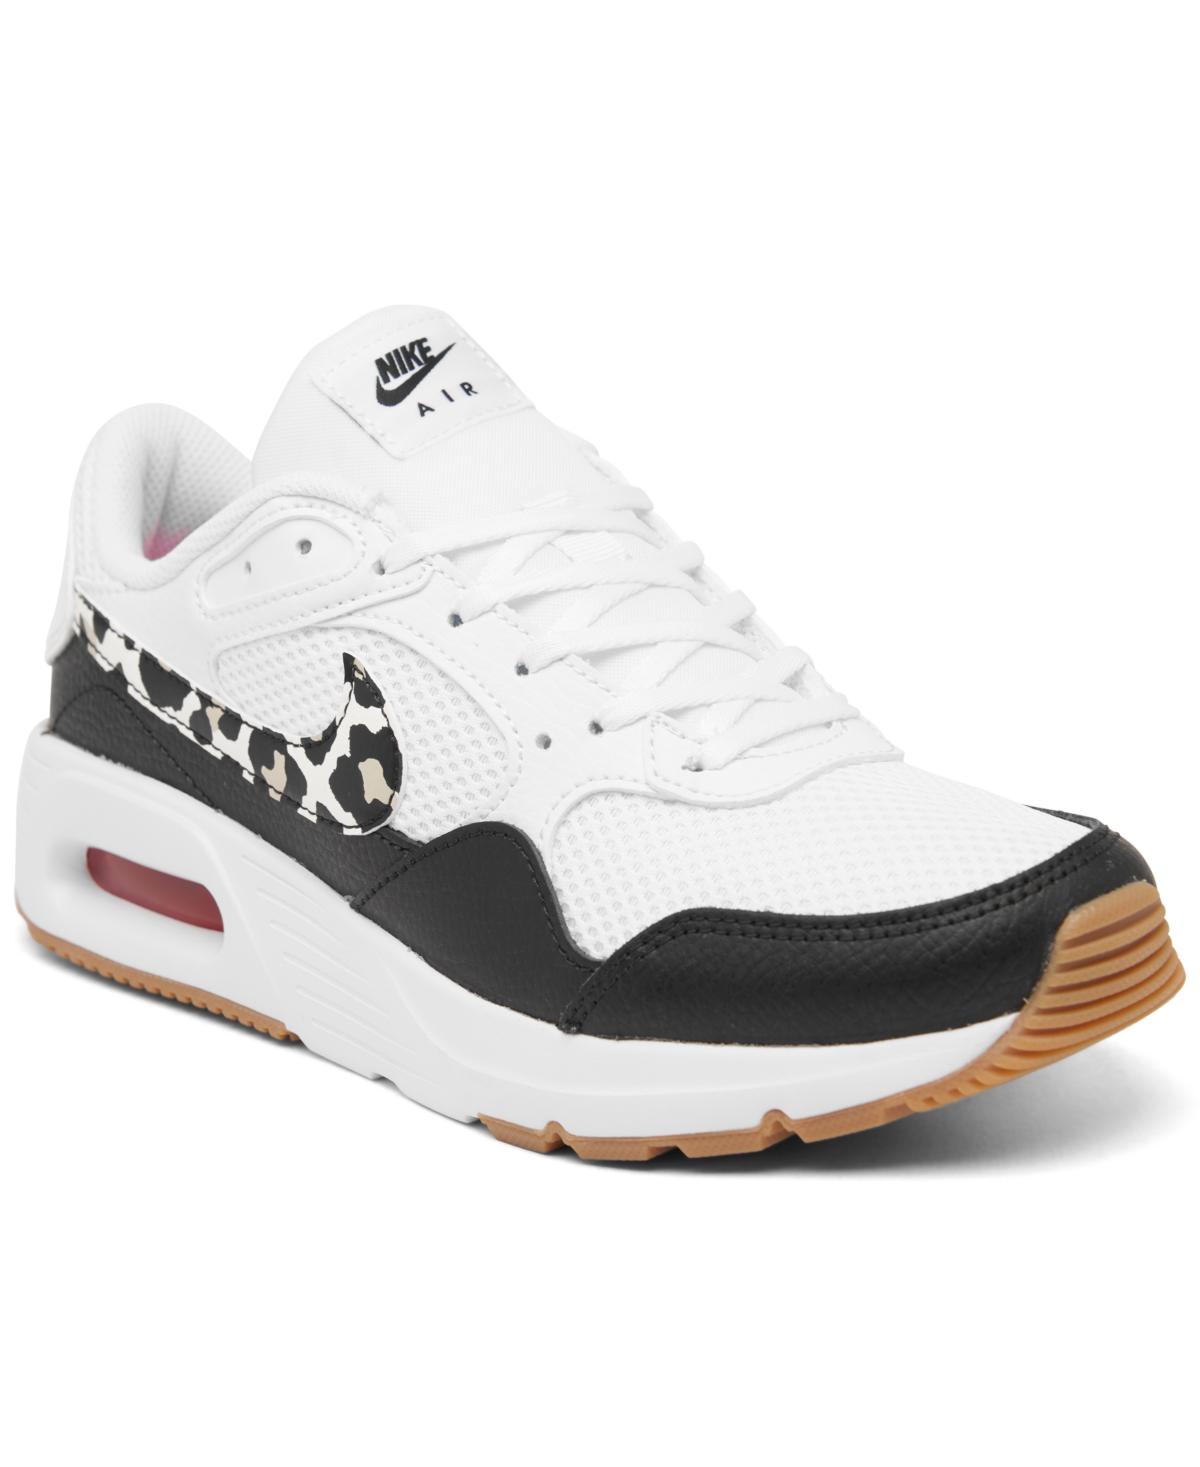 Nike Air Max Sc Lp Casual Sneakers From Finish Line in White | Lyst